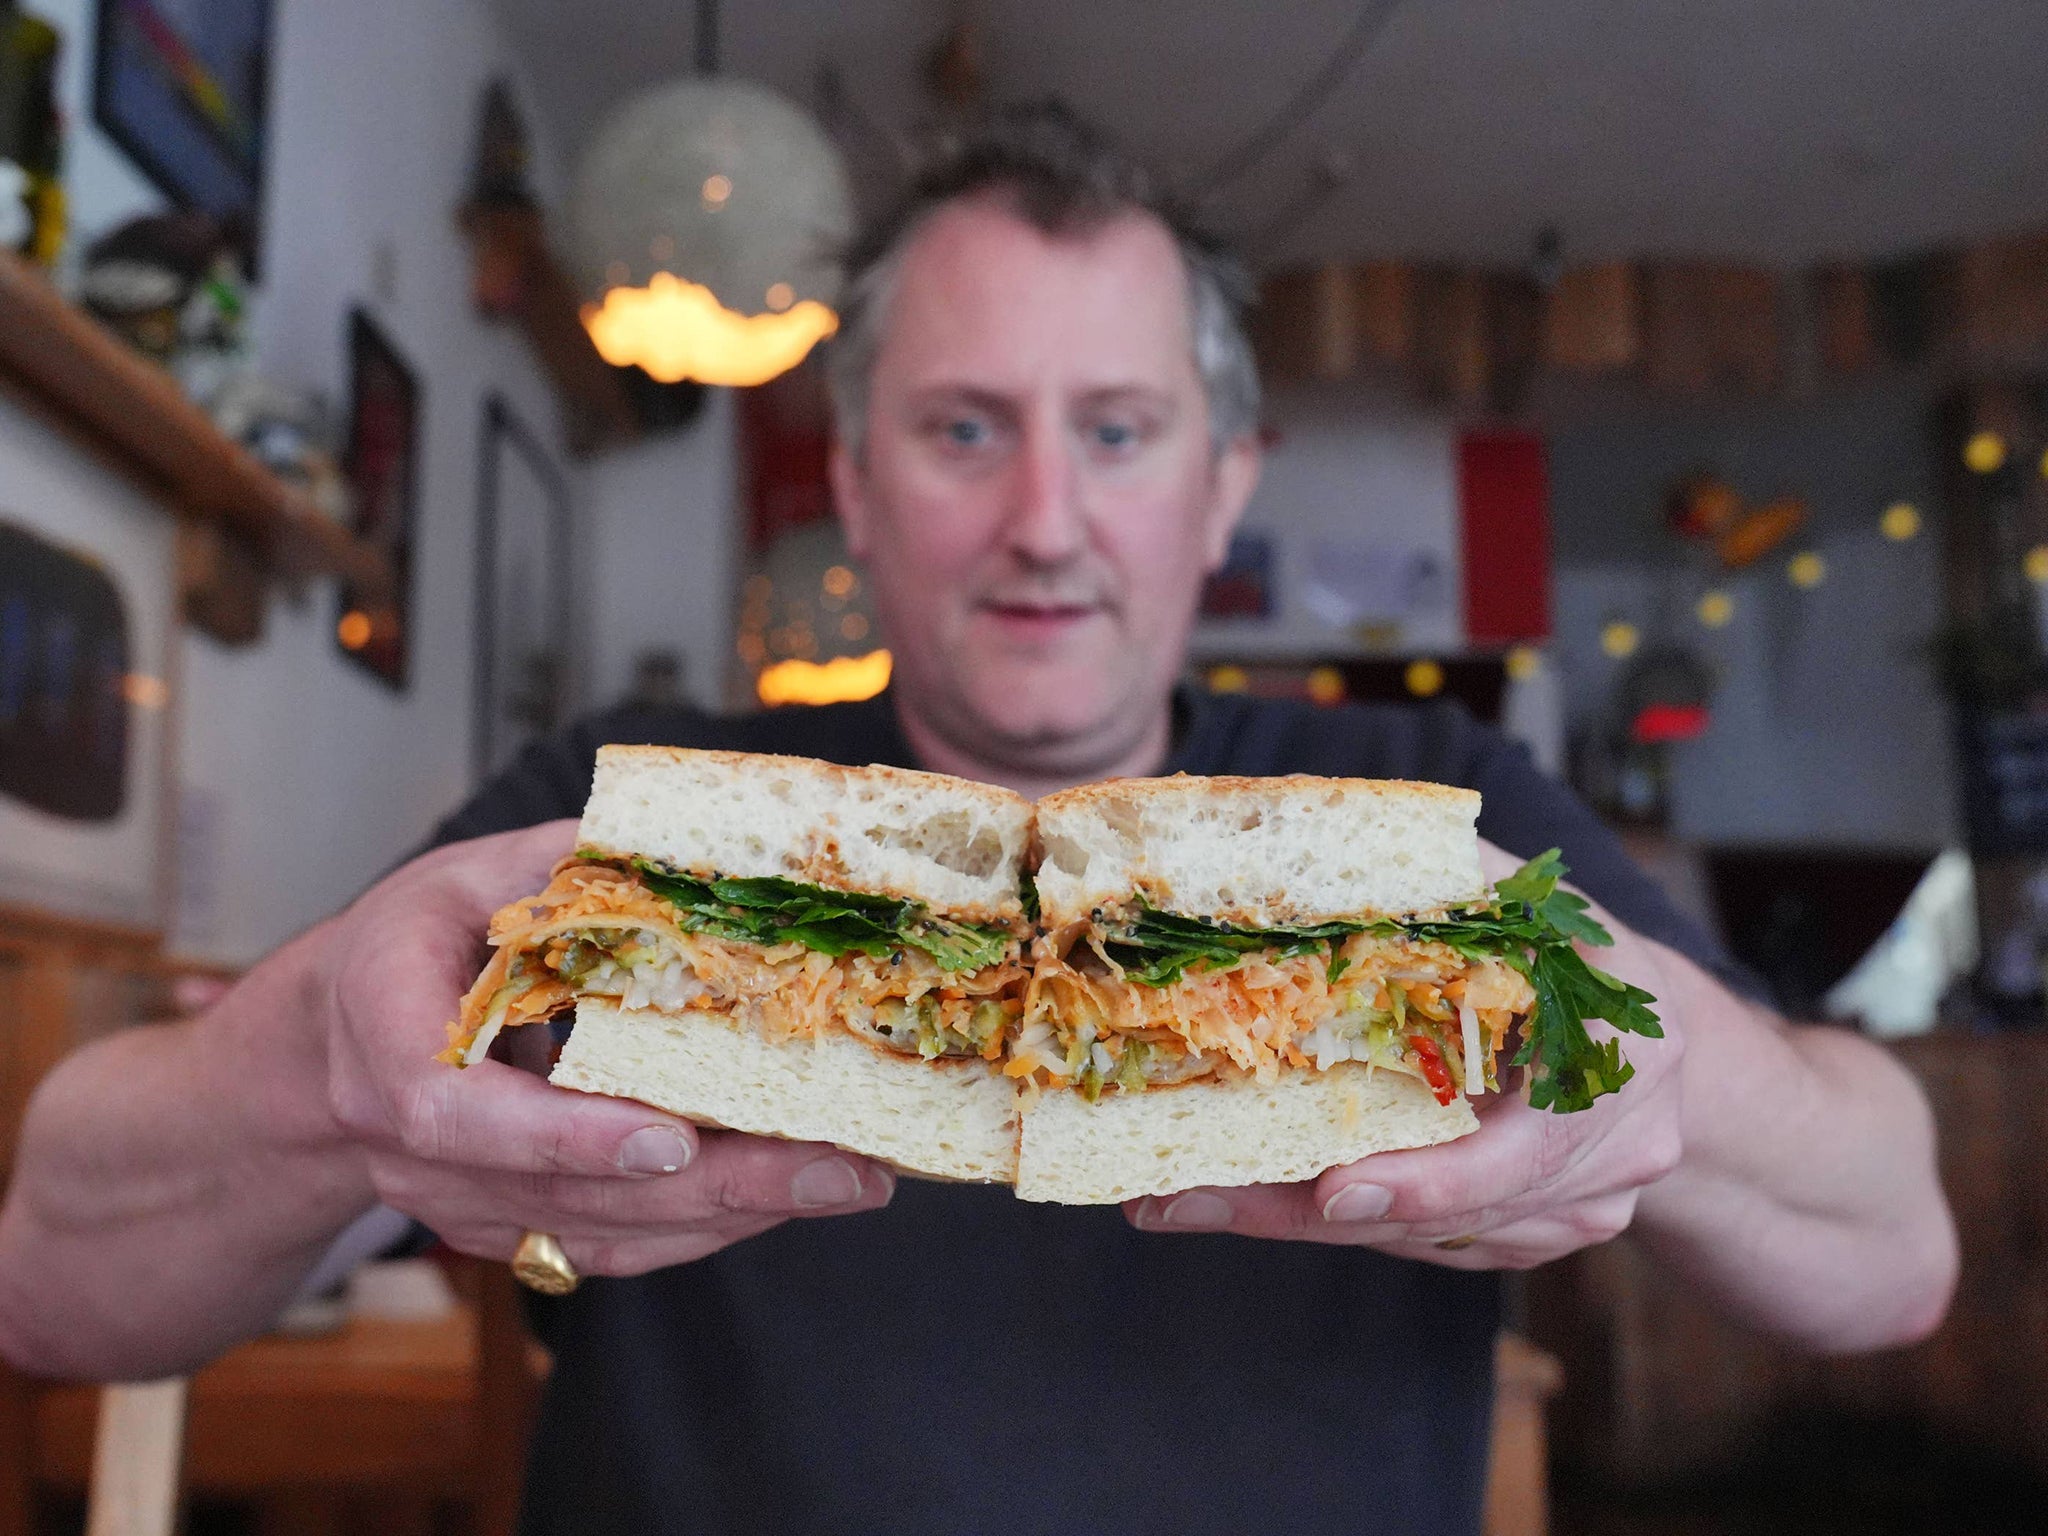 Halley opened Max’s Sandwich Shop in 2014